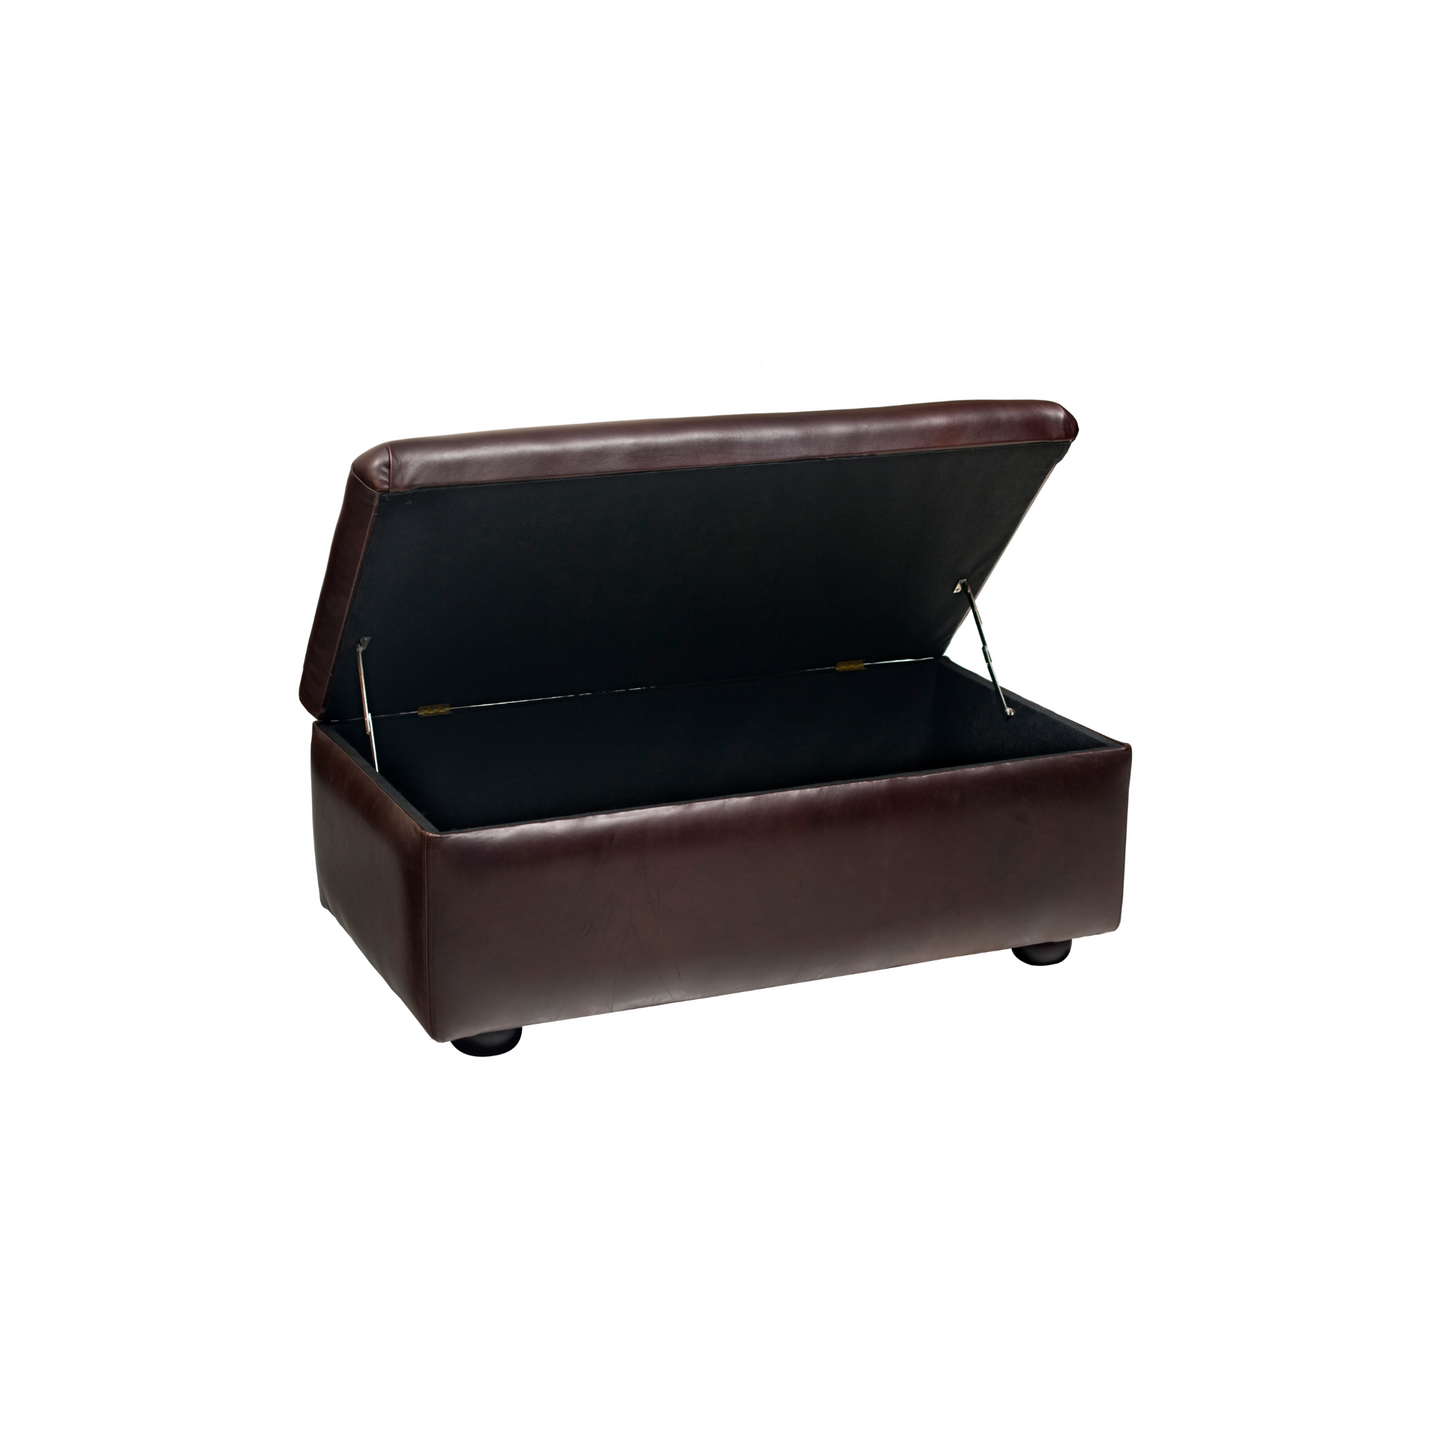 Singita Lid Chest Ottoman – Discover versatility and space-saving elegance with the Singita Lid Chest Ottoman. Customize this unique piece to your desired size and choose from a wide range of premium leathers or fabrics, adding a touch of personalized style to your space